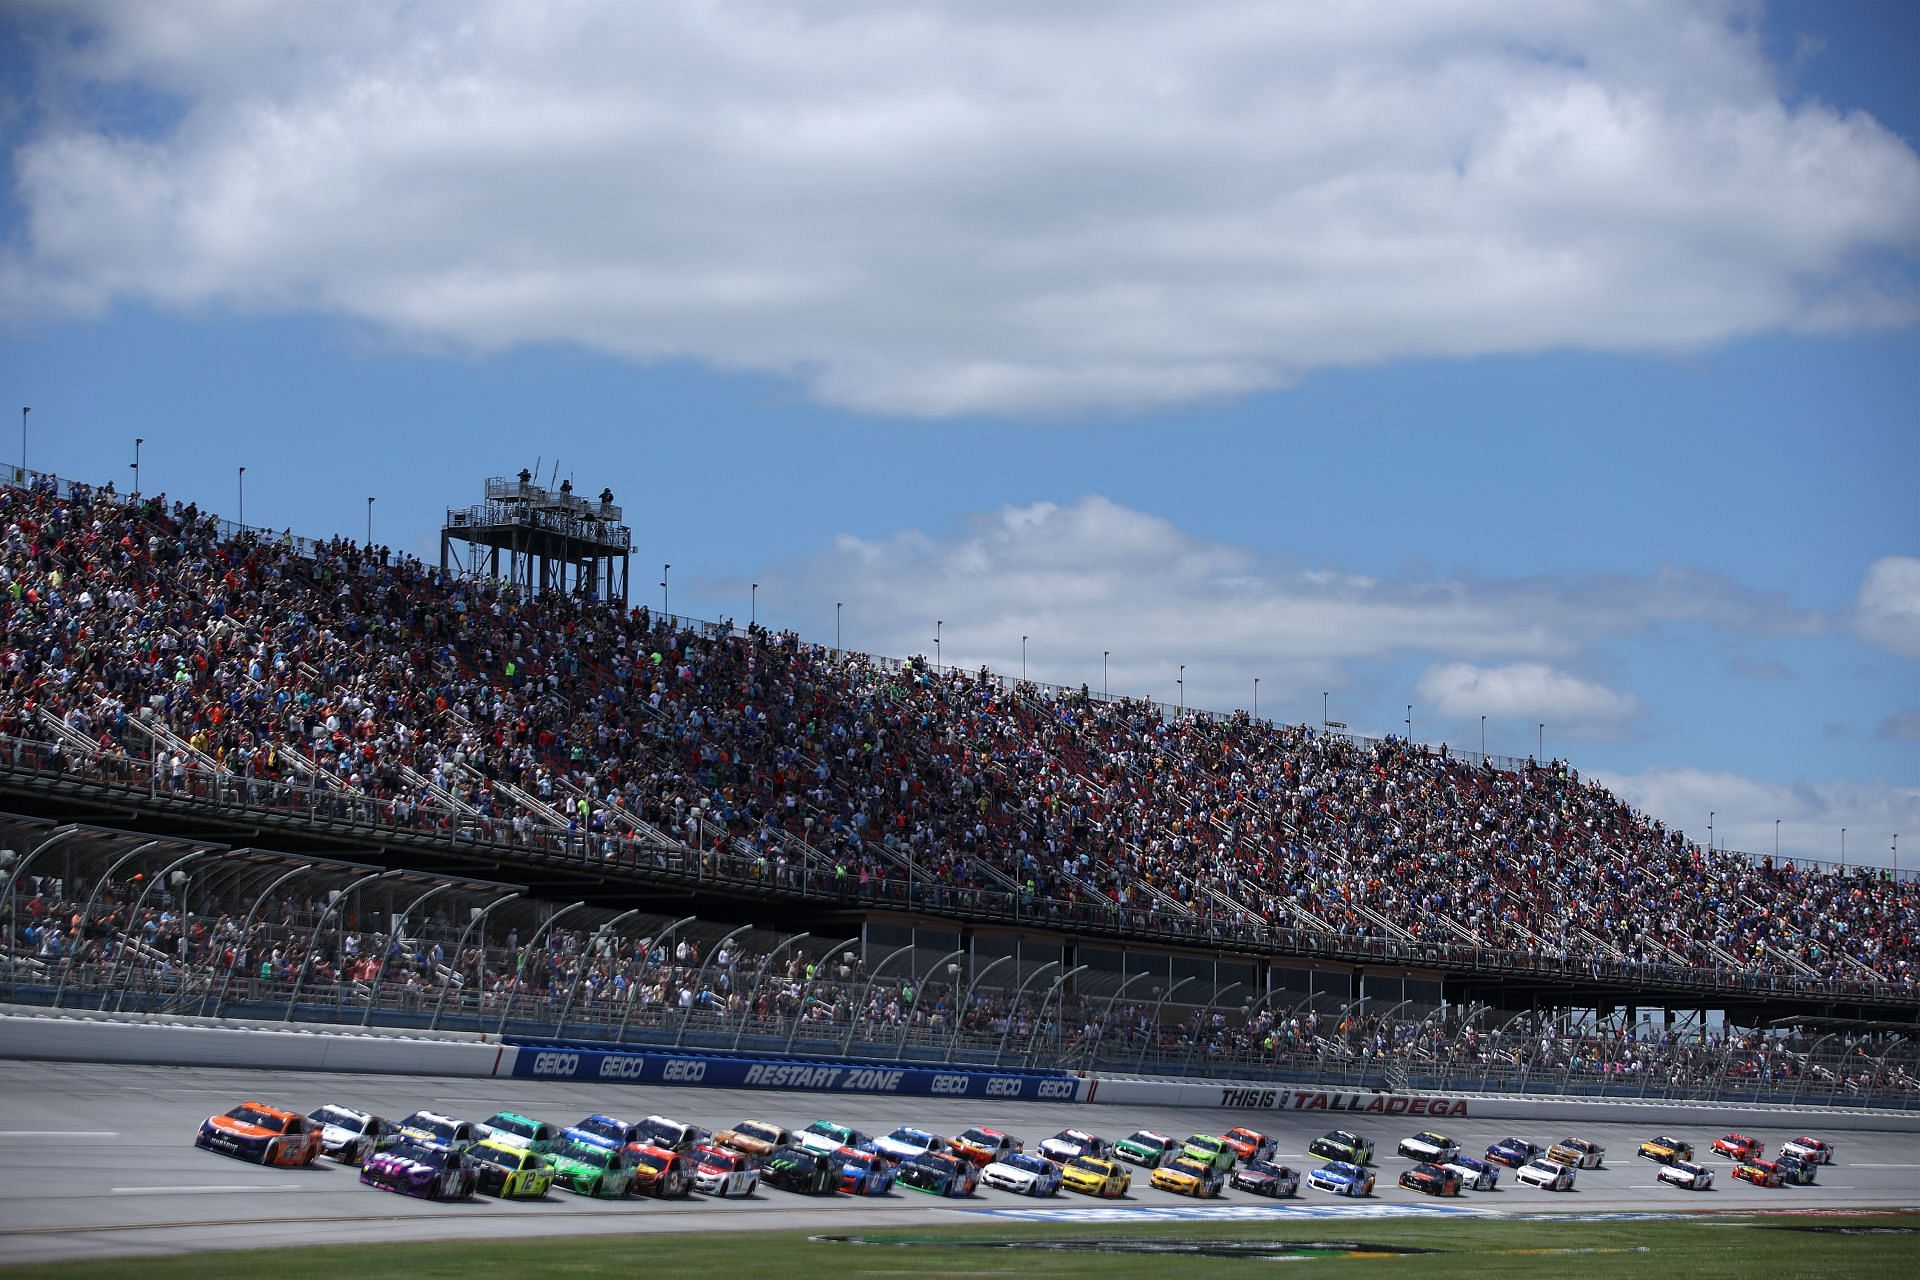 A general view of cars on track during the NASCAR Cup Series GEICO 500 at Talladega Superspeedway (Photo by Sean Gardner/Getty Images)